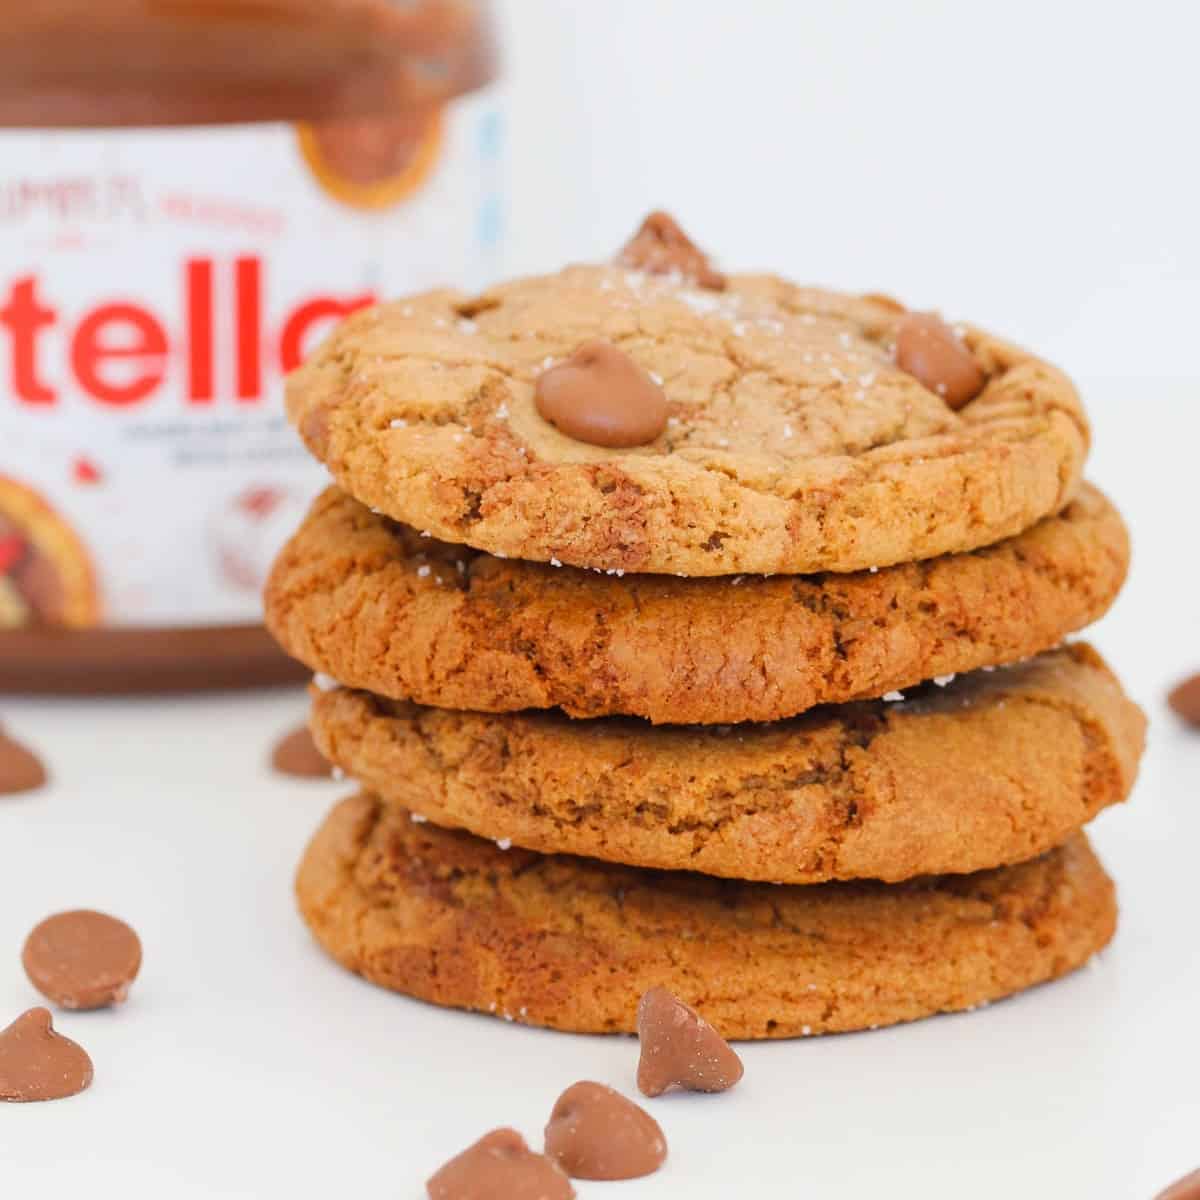 Four brown cookies in a stack with chocolate chips surrounding them and a jar of Nutella.